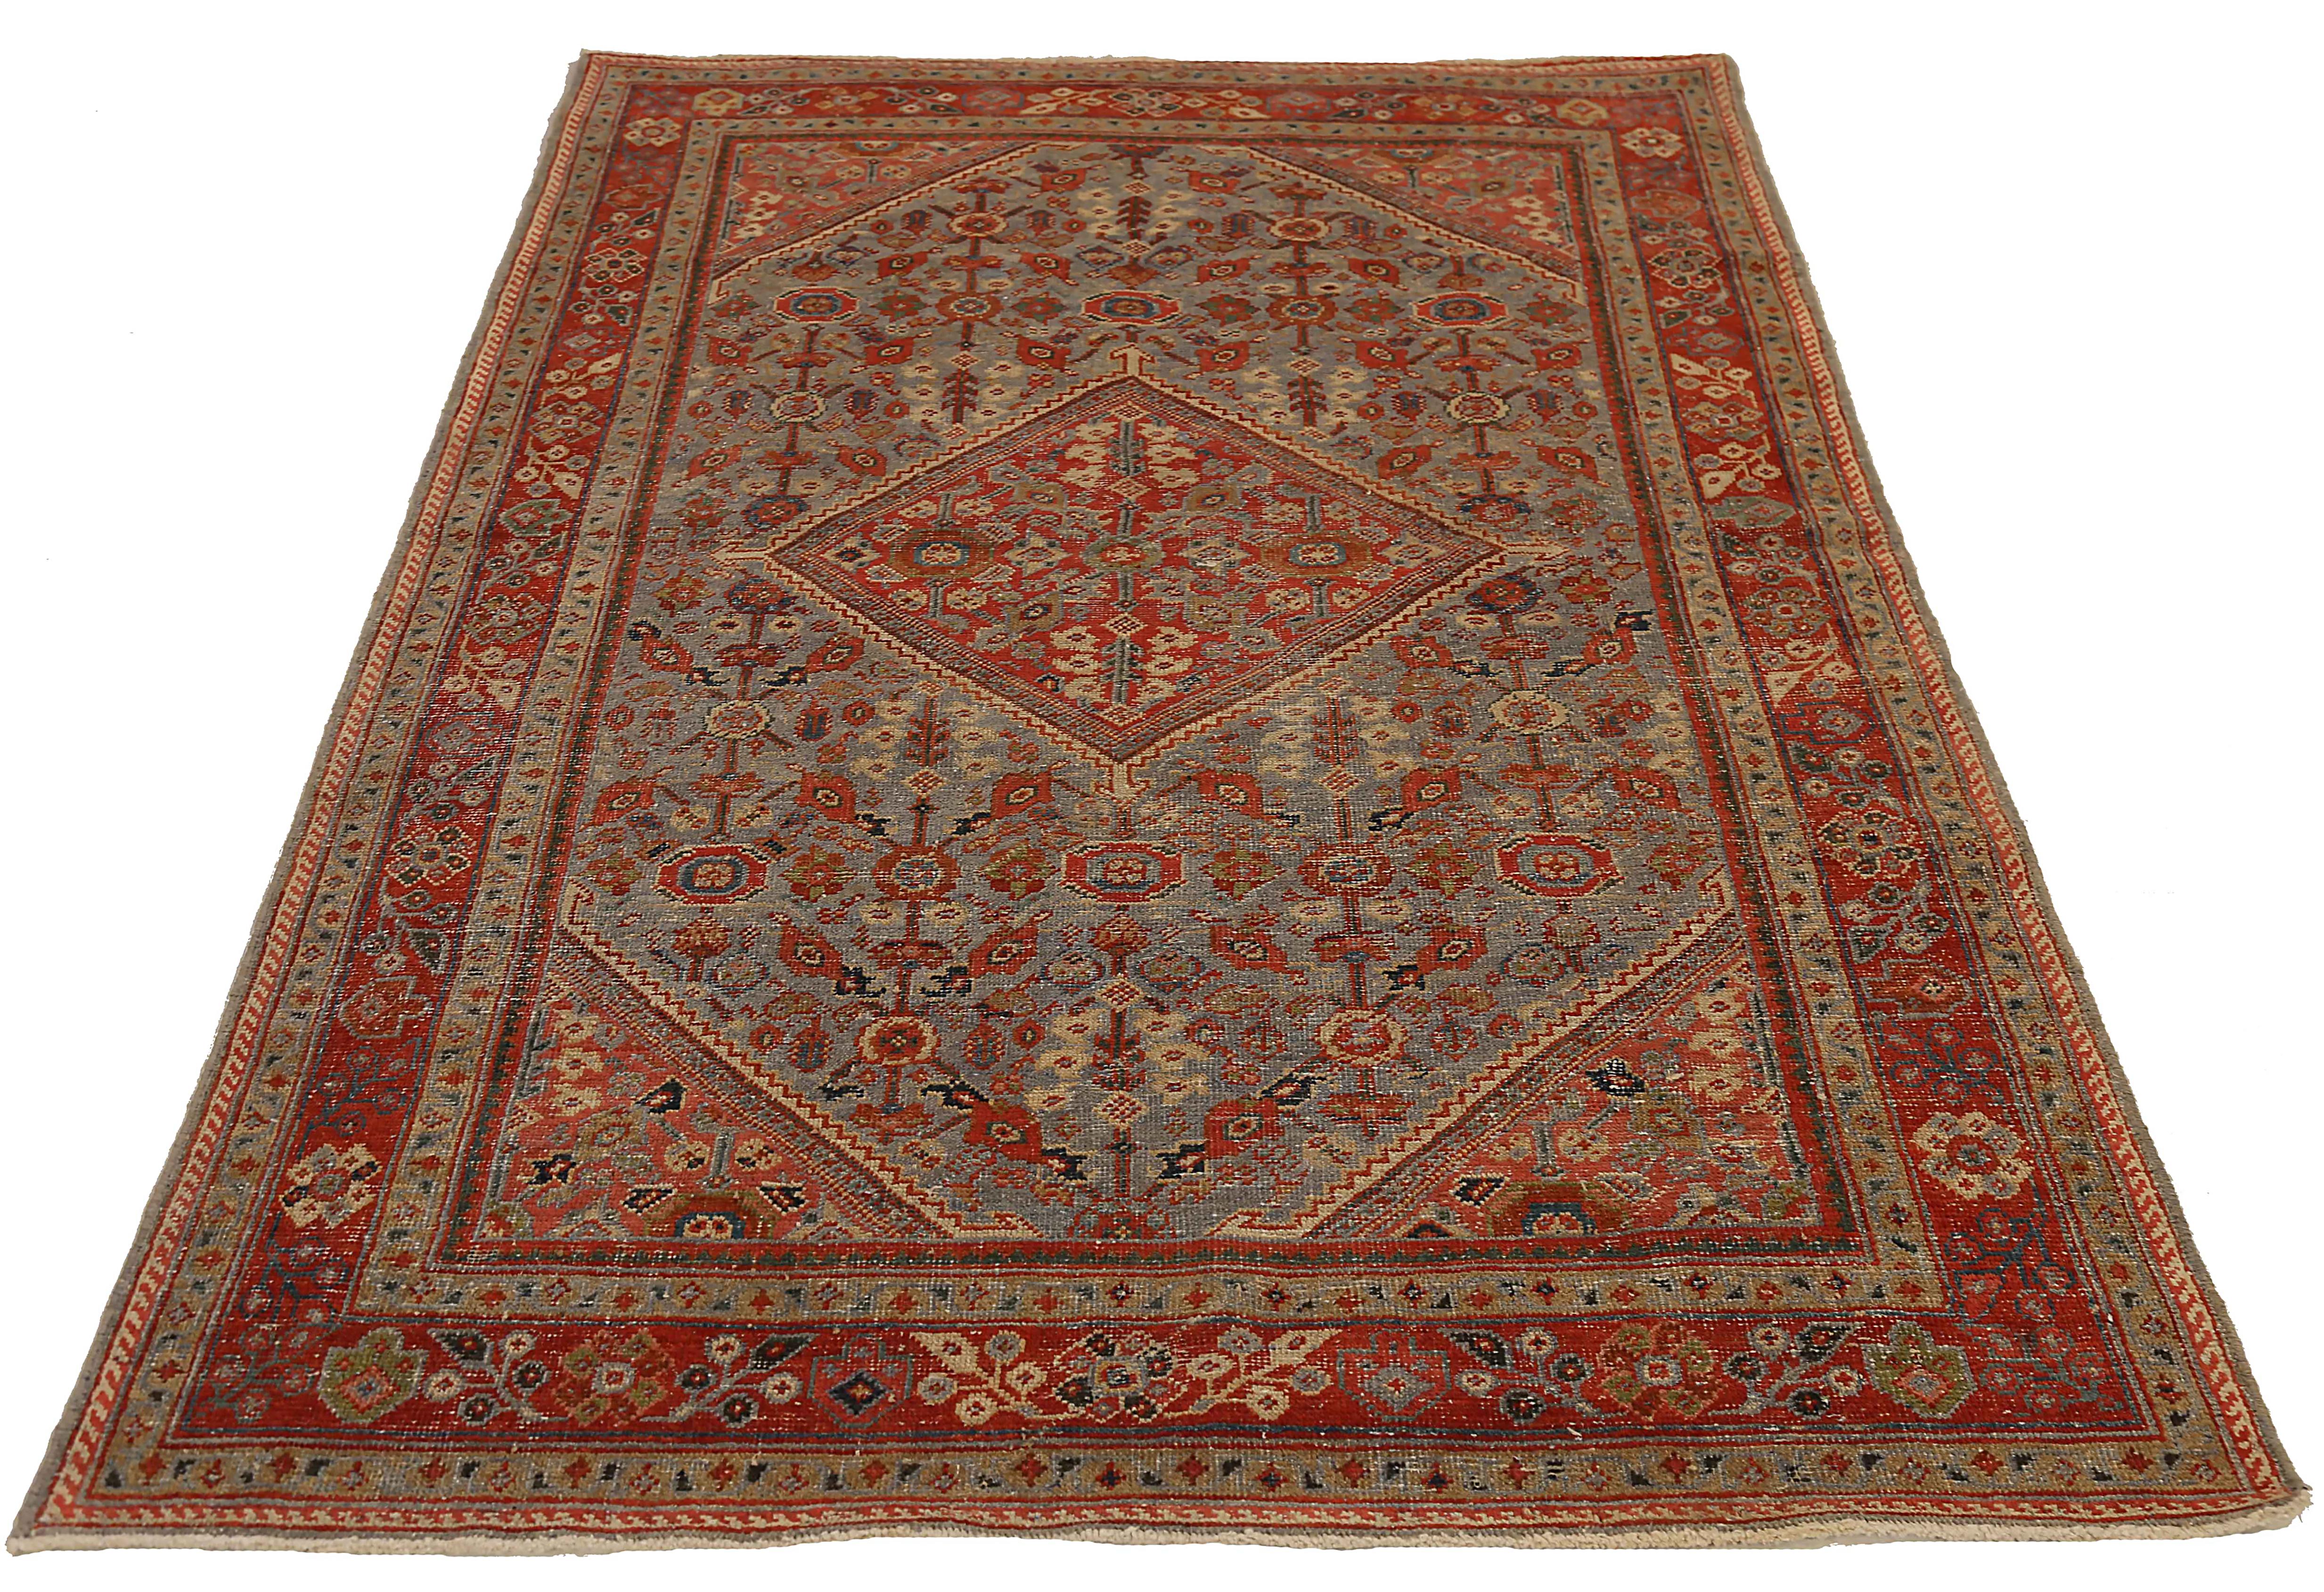 Antique Persian area rug handwoven from the finest sheep’s wool. It’s colored with all-natural vegetable dyes that are safe for humans and pets. It’s a traditional Meshkabad design handwoven by expert artisans. It’s a lovely area rug that can be